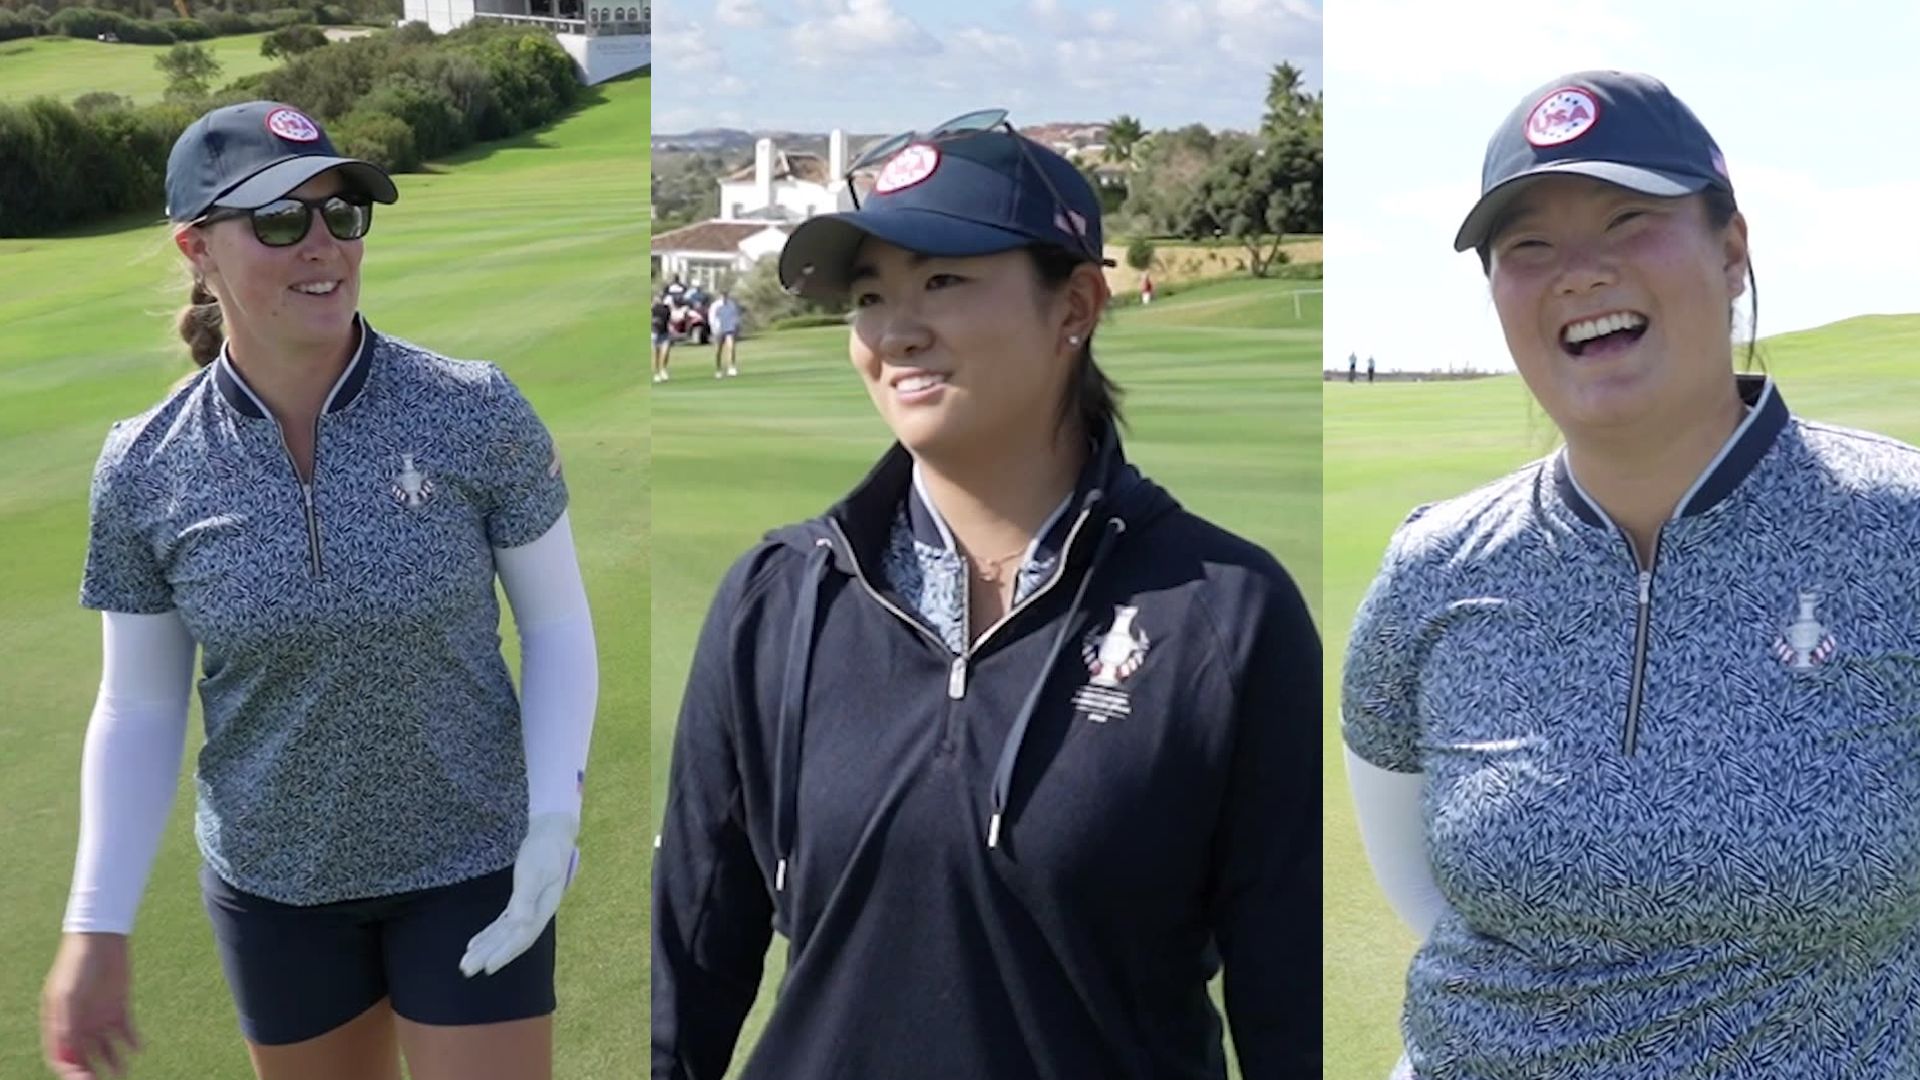 On the course with U.S. Solheim Cup stars